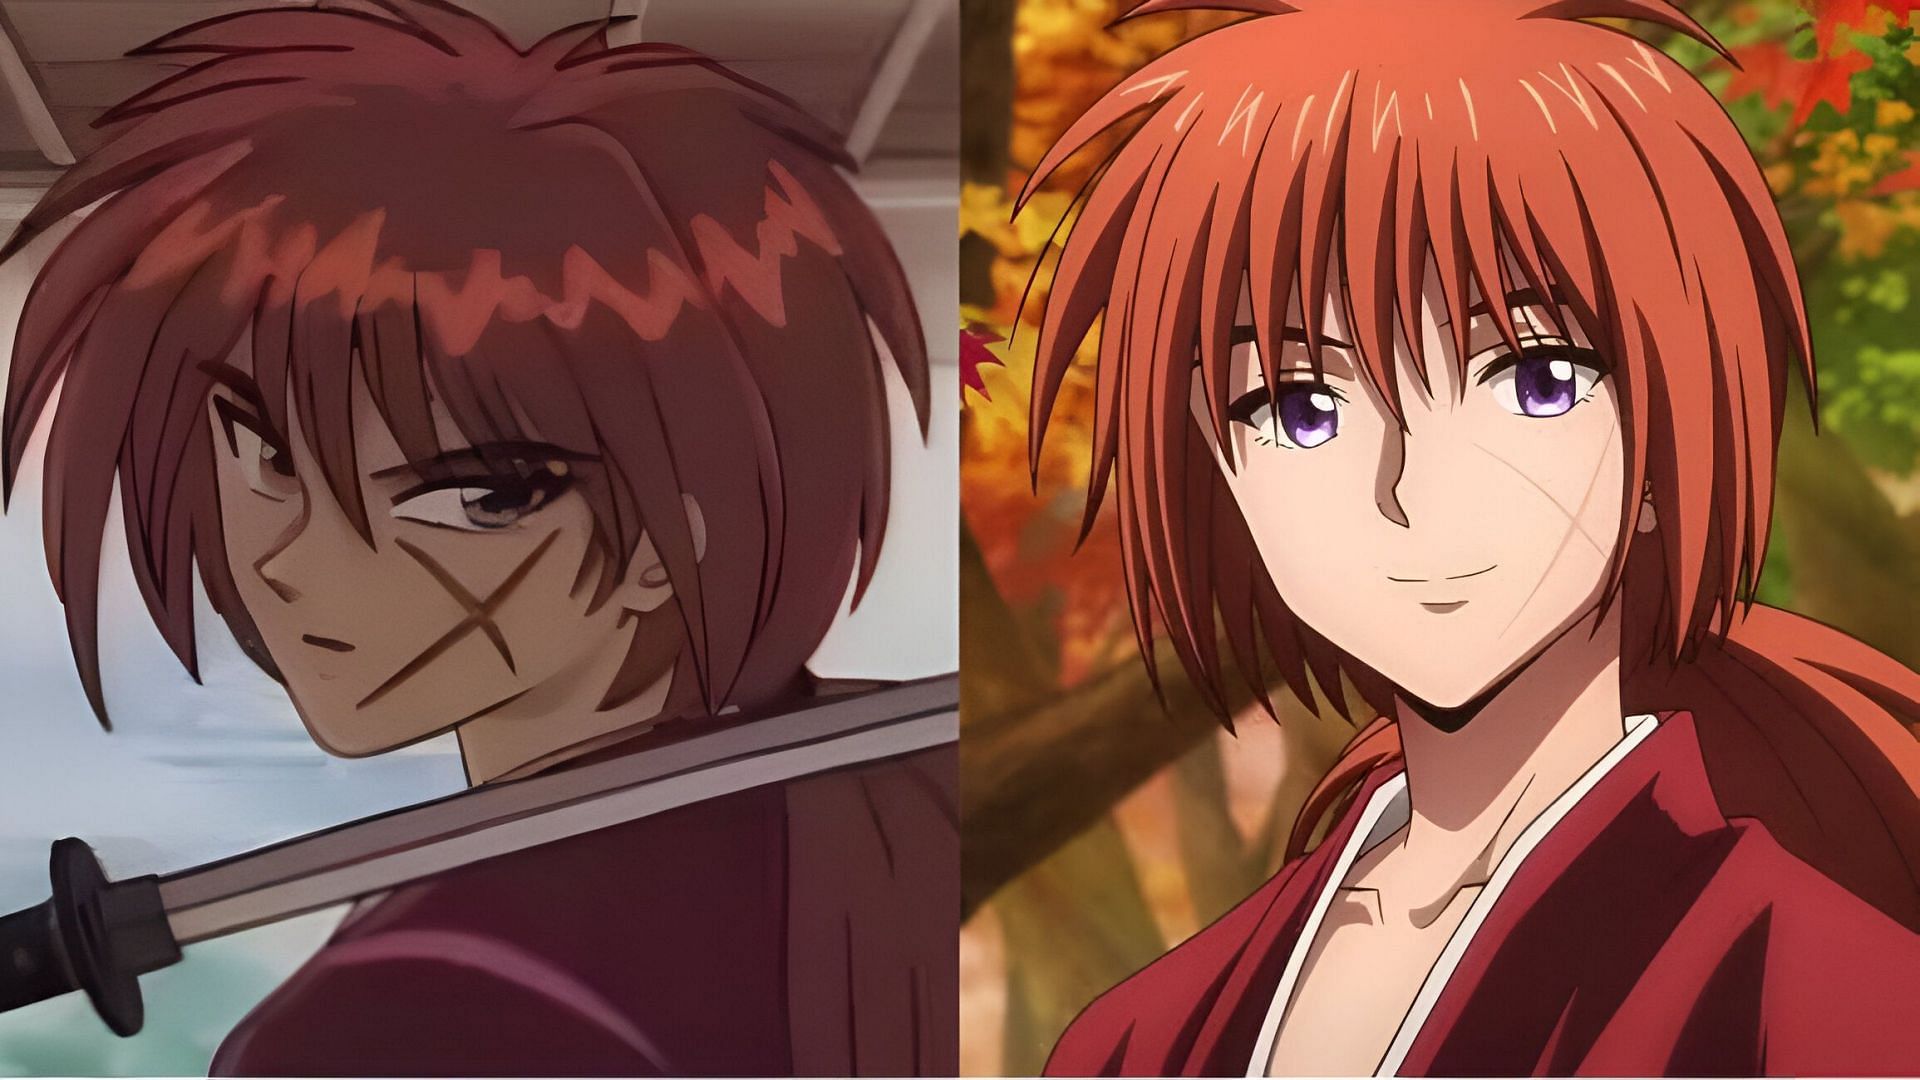 Kenshin Himura as seen in the old (left) and new (right) anime adaptation (Image via Studio Deen &amp; Lidenfilms)